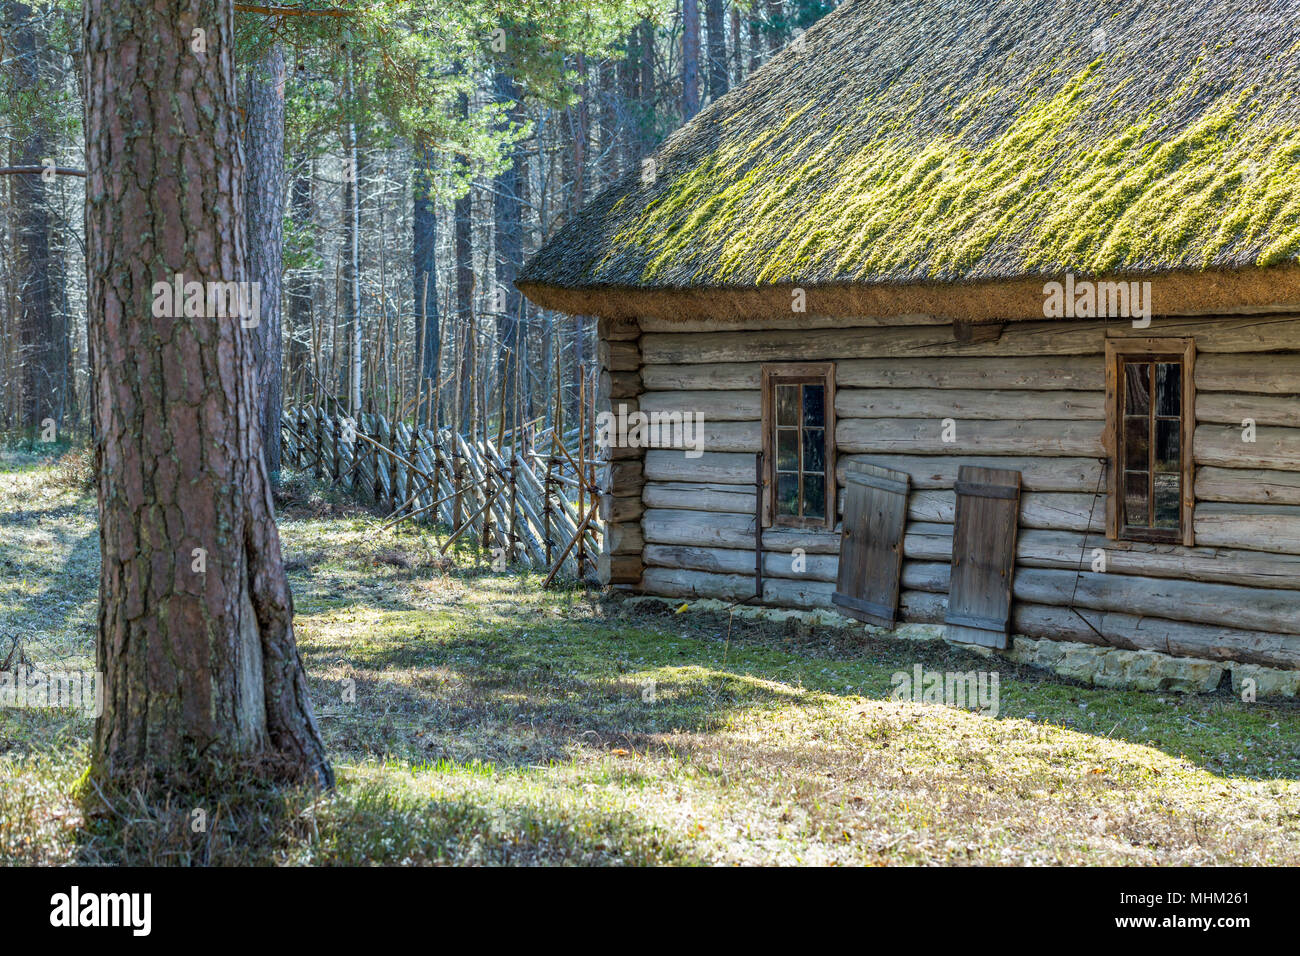 Old log house with a thatched roof and windows Stock Photo